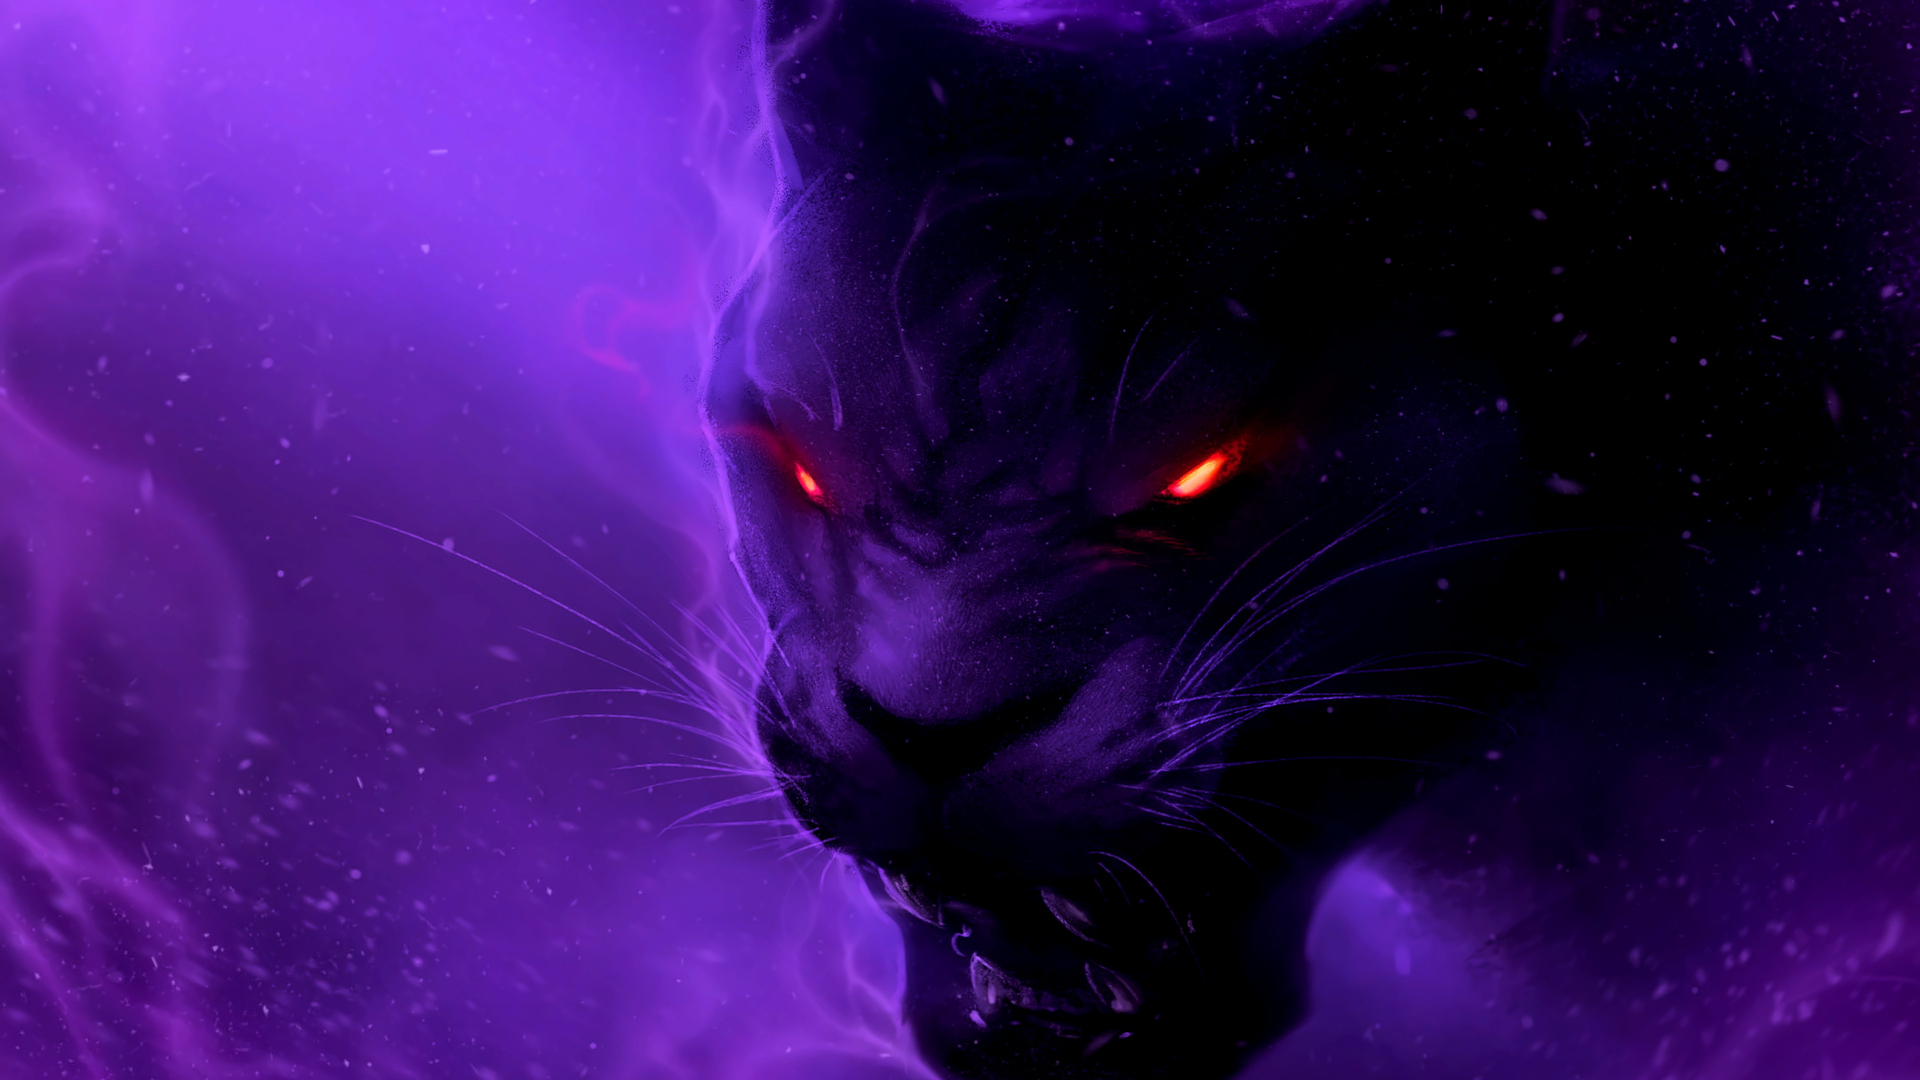 Download Panther, Eyes, Art Wallpaper in 1920x1080 Resolution